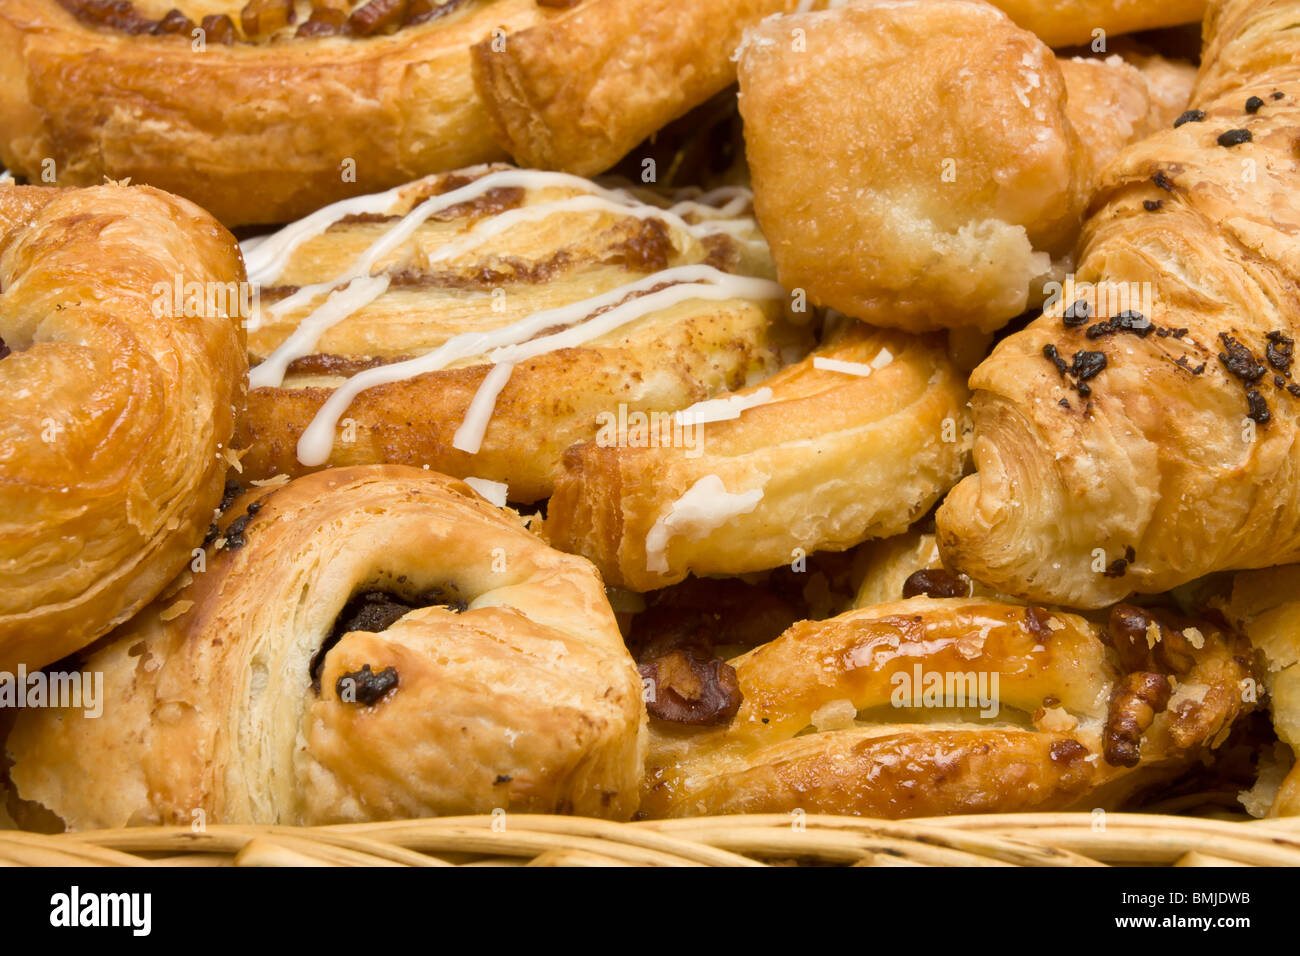 background close up image of French and Danish Puff Pastry treats. Stock Photo